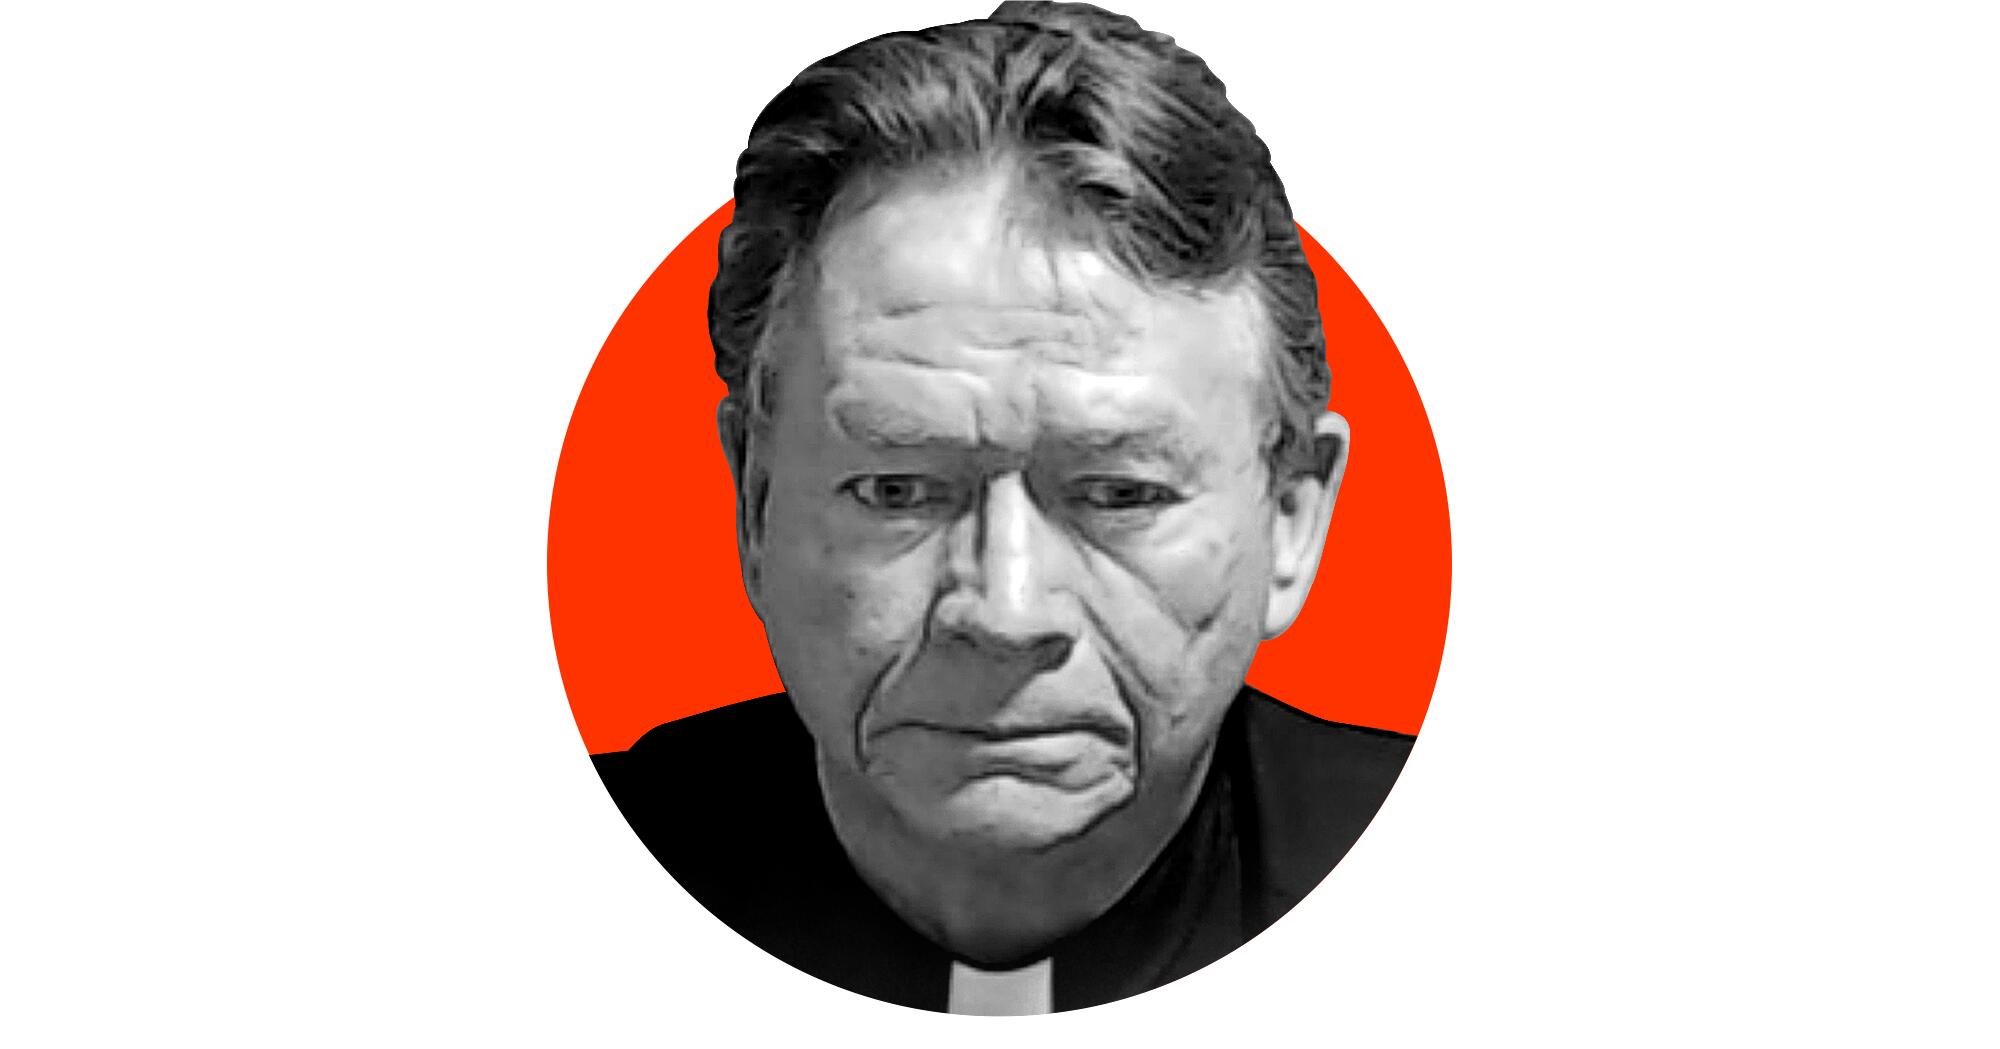 A photo illustration of a black-and-white police booking photo of the Rev. Stephen Lee emerging from a red circle